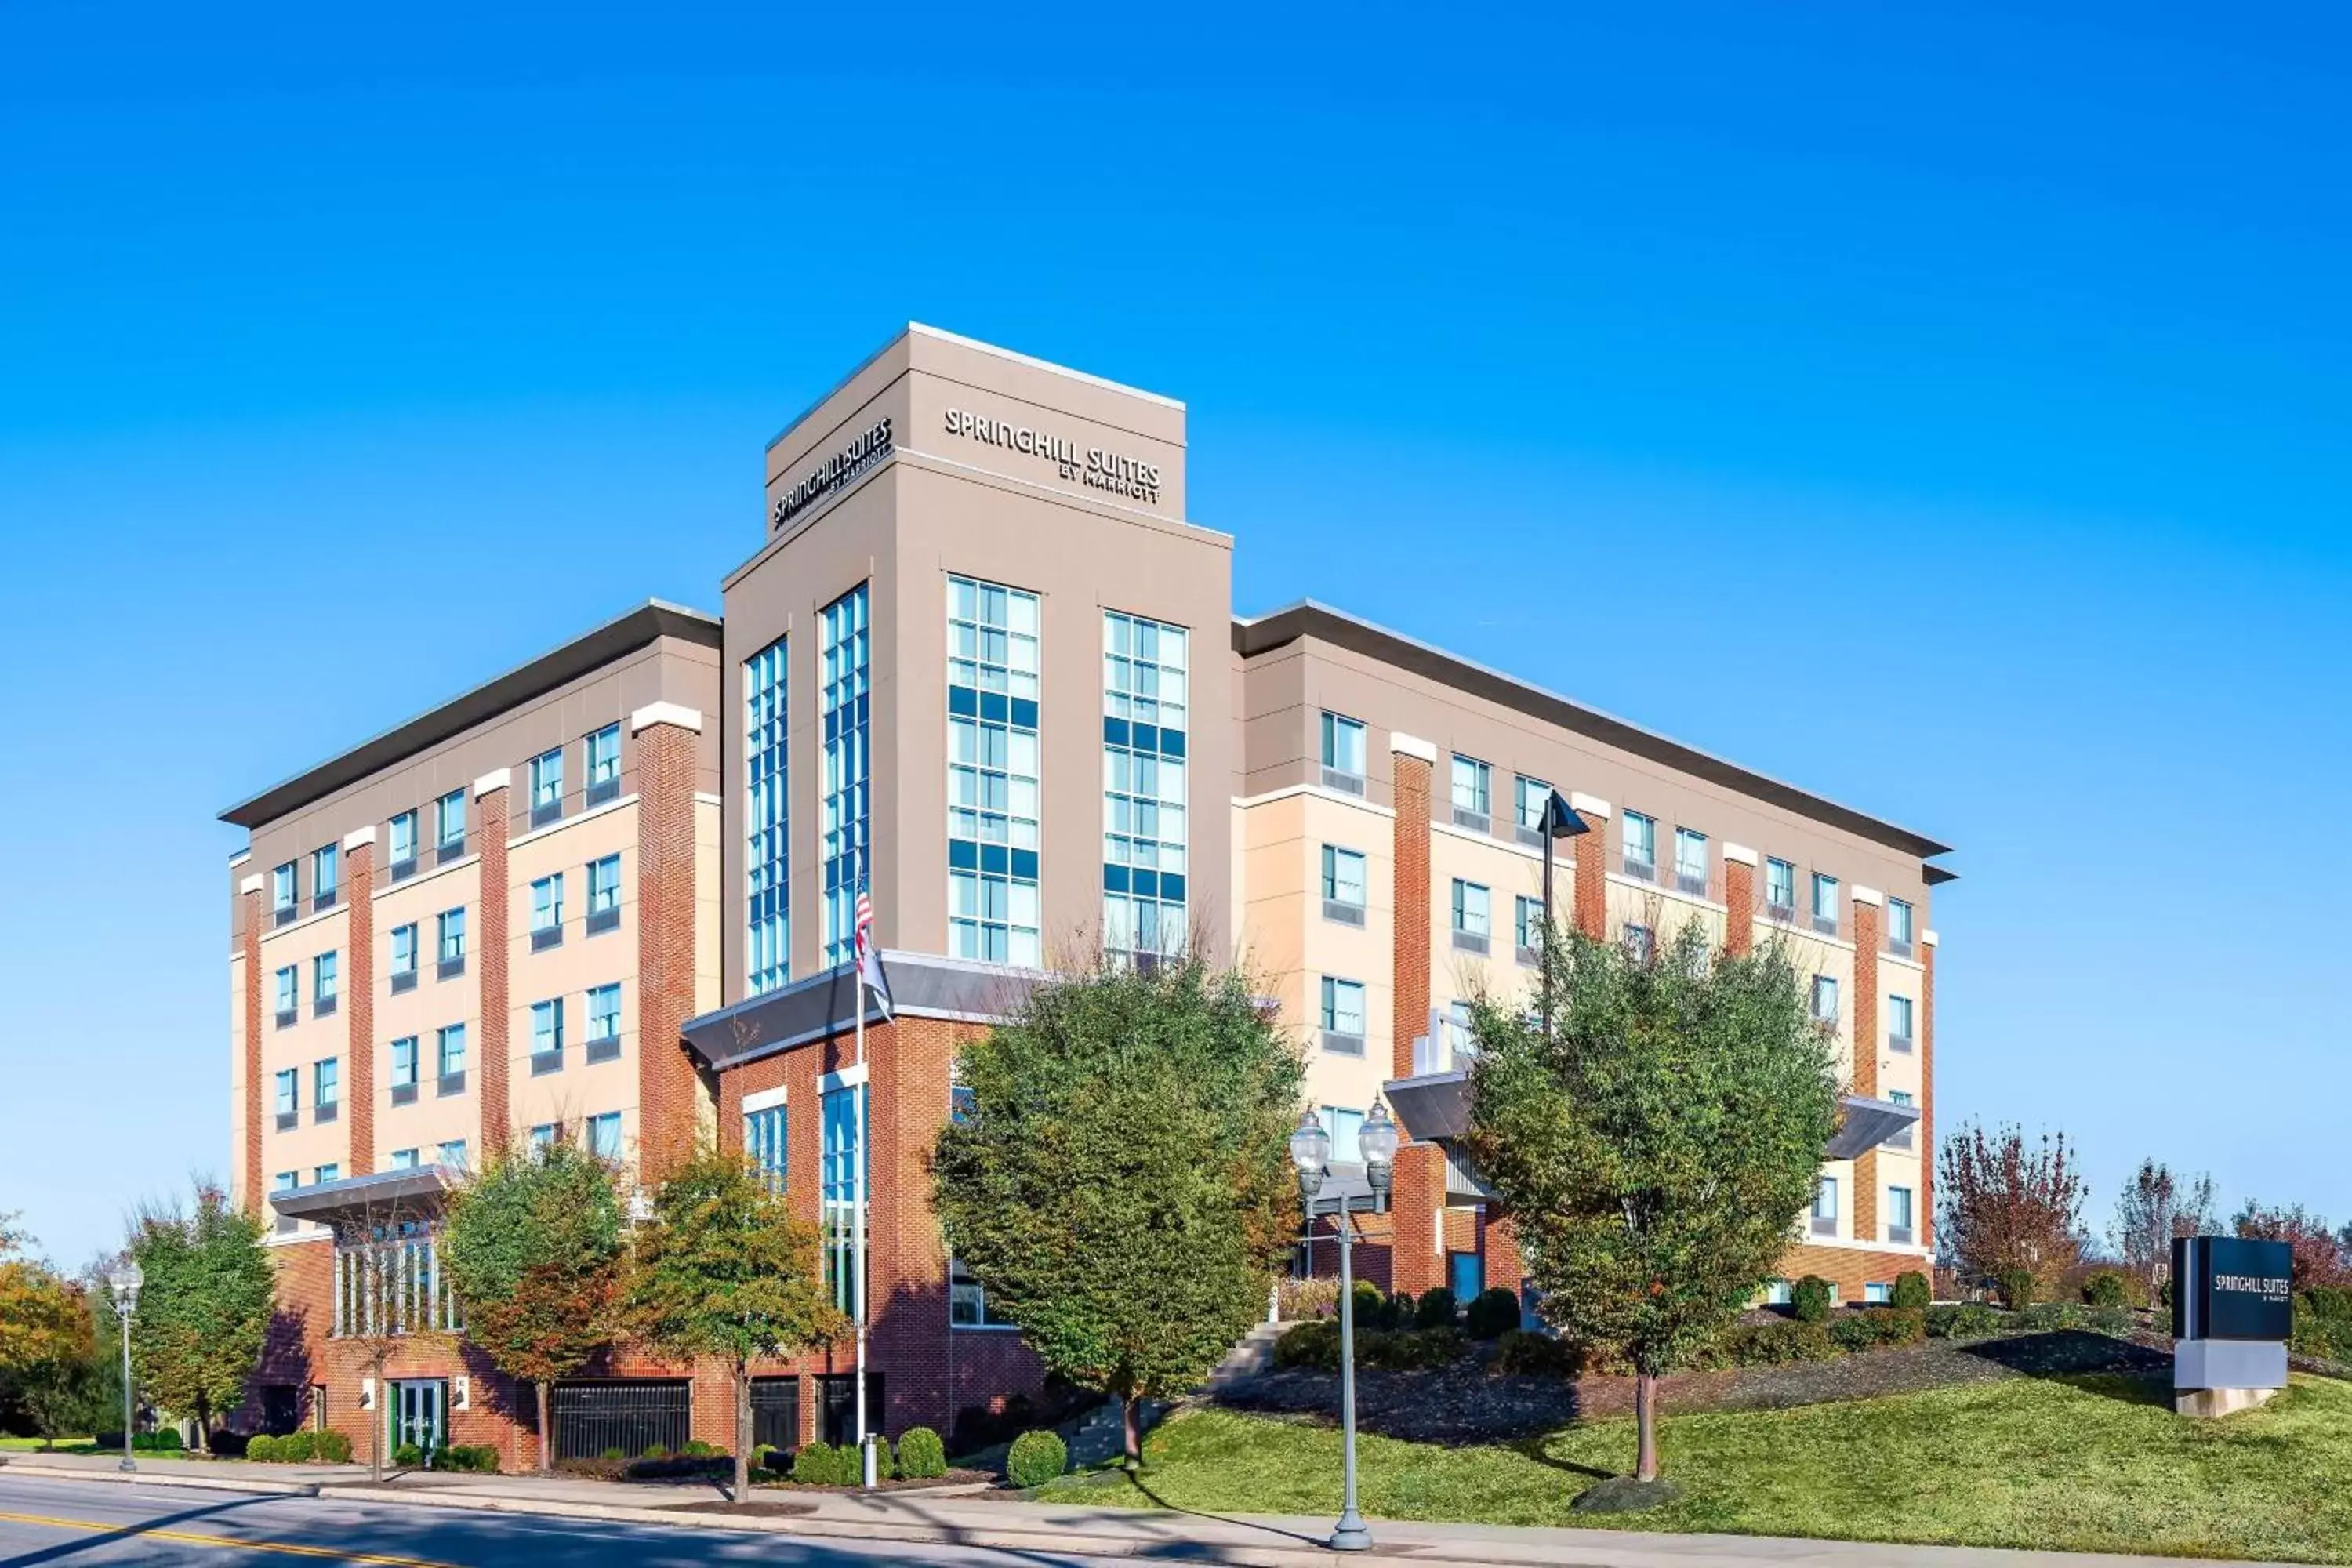 Property Building in SpringHill Suites by Marriott Roanoke